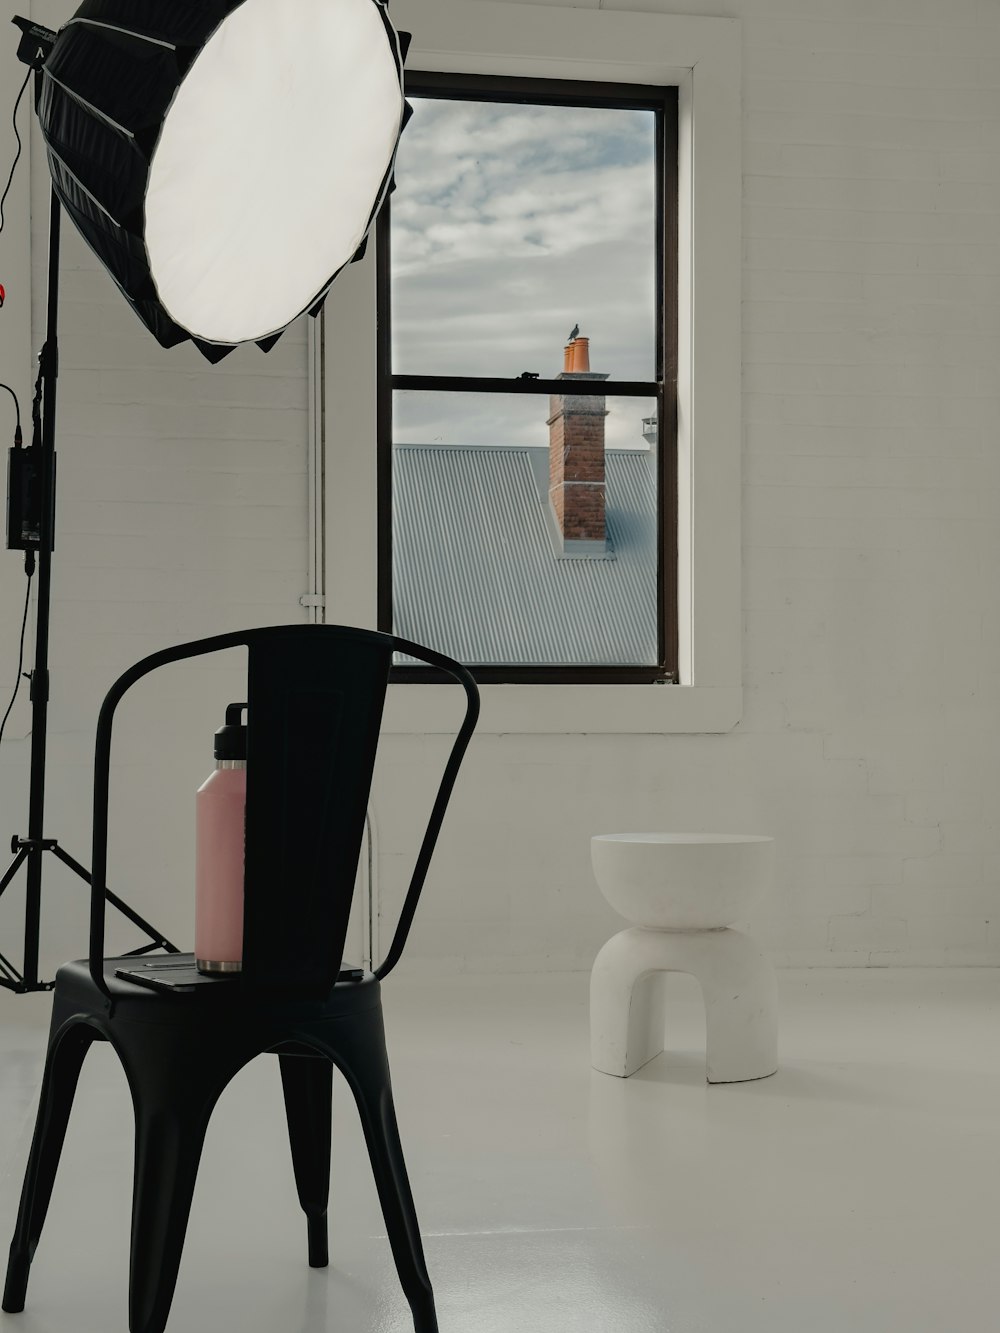 a chair and a toilet in a bathroom